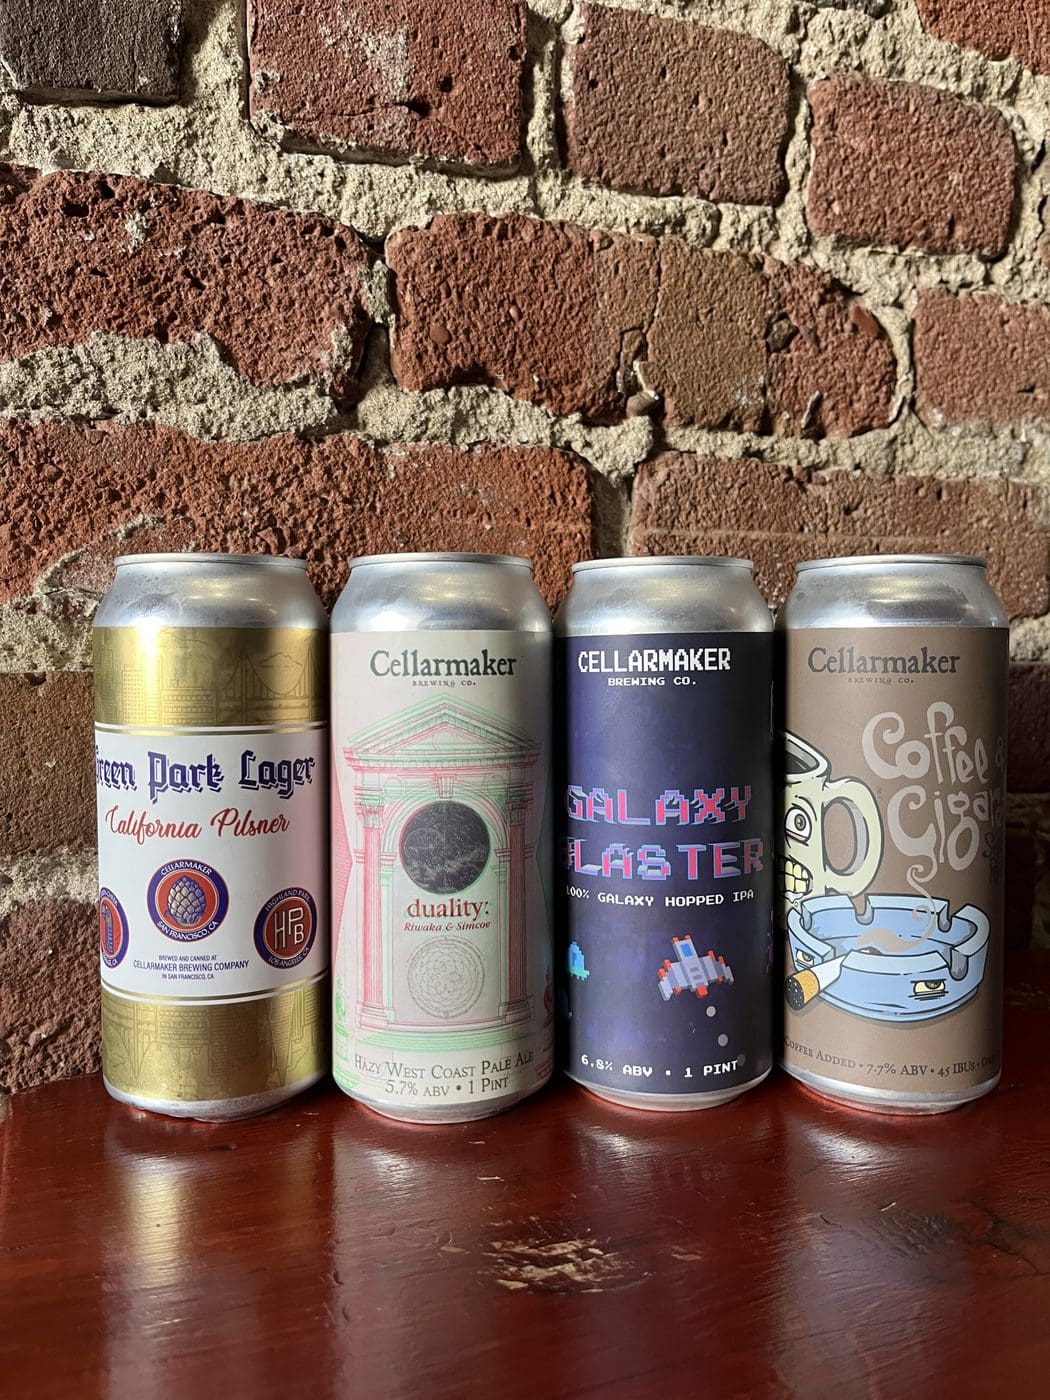 16 Cans (4 x 4 packs) Mix and Match – 4×4 CASE – Shipping out ASAP*